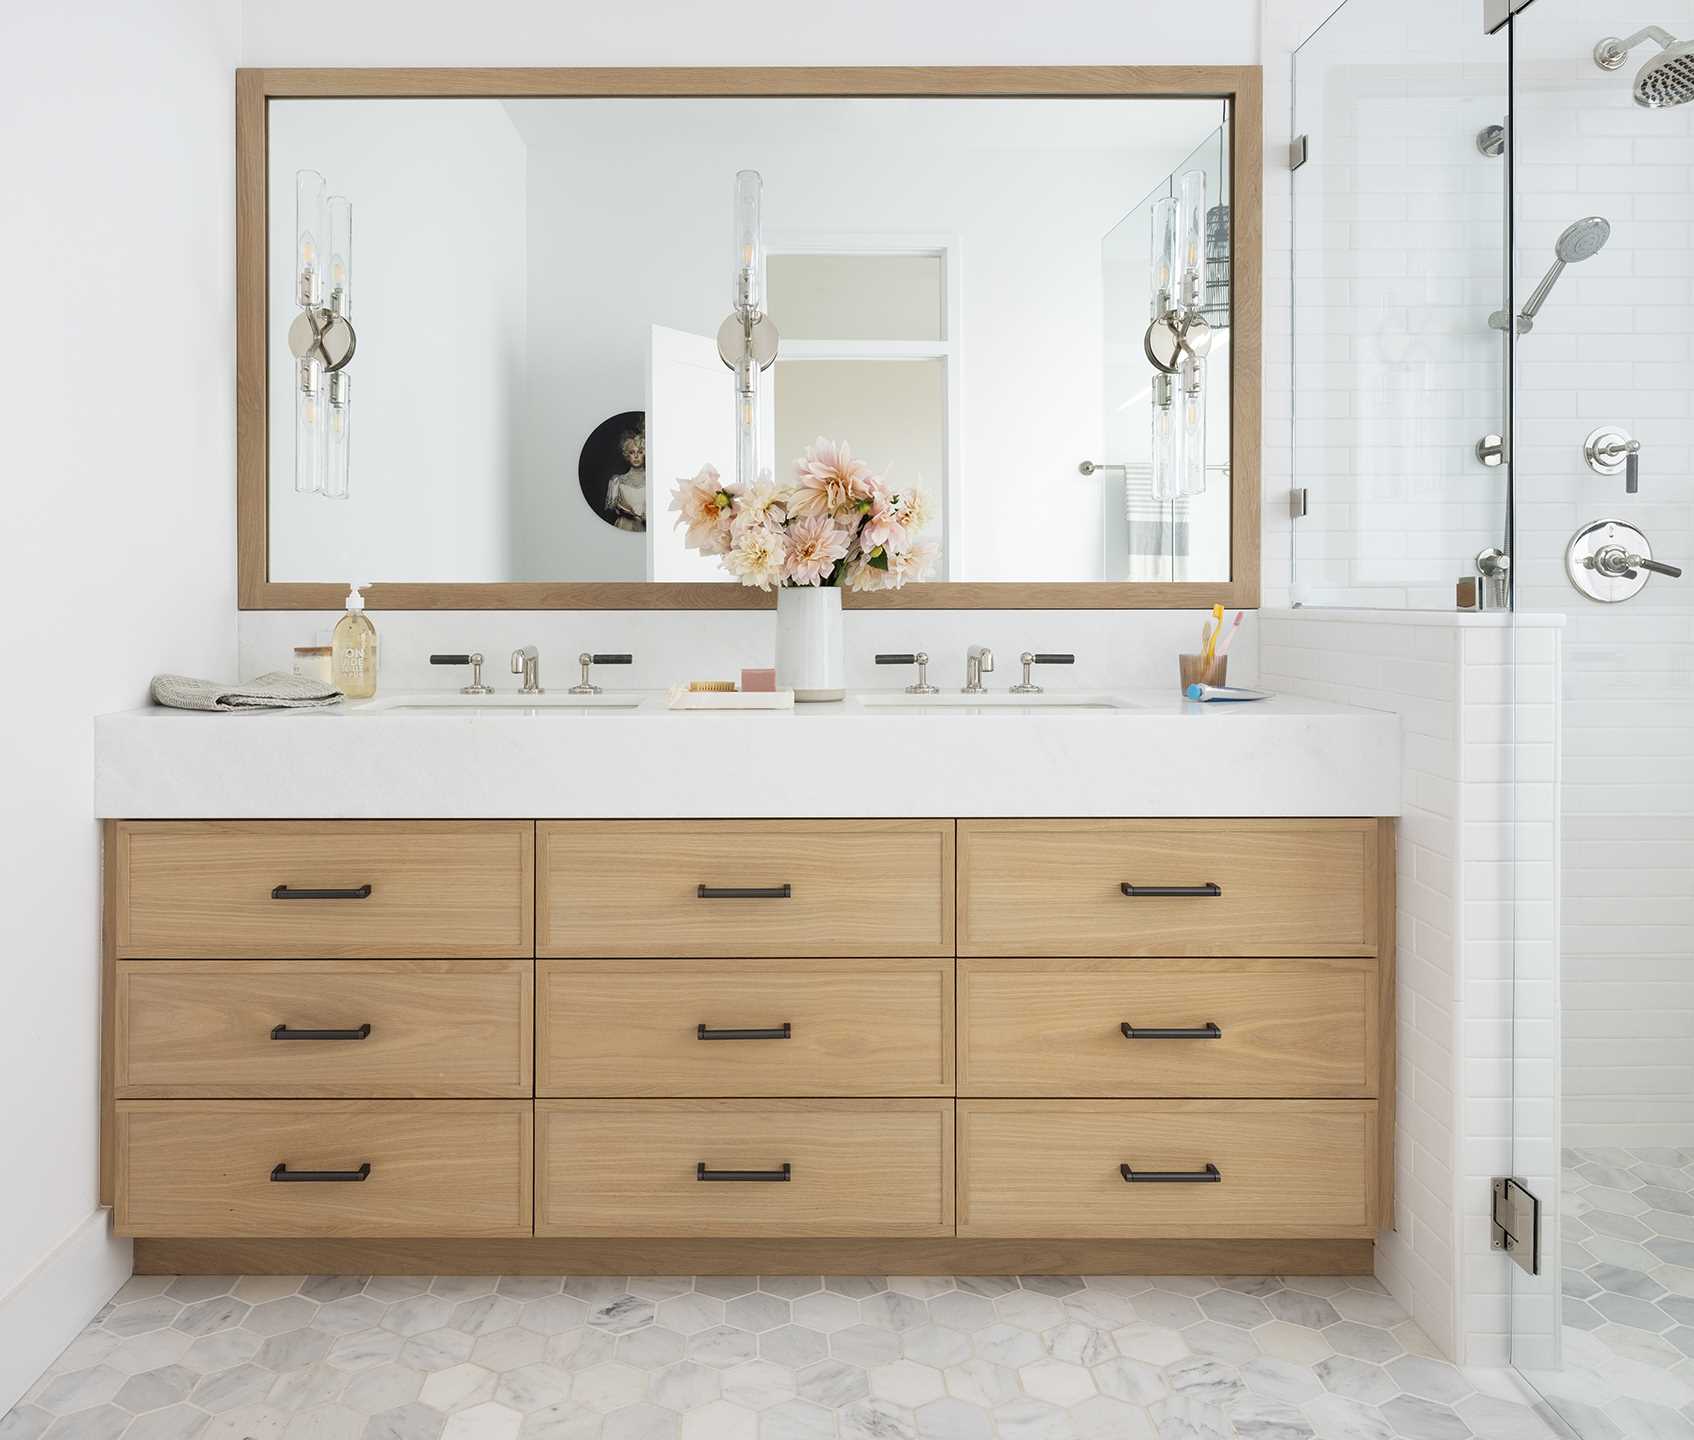 A modern bathroom with a custom-designed wood vanity that fits the space perfectly.